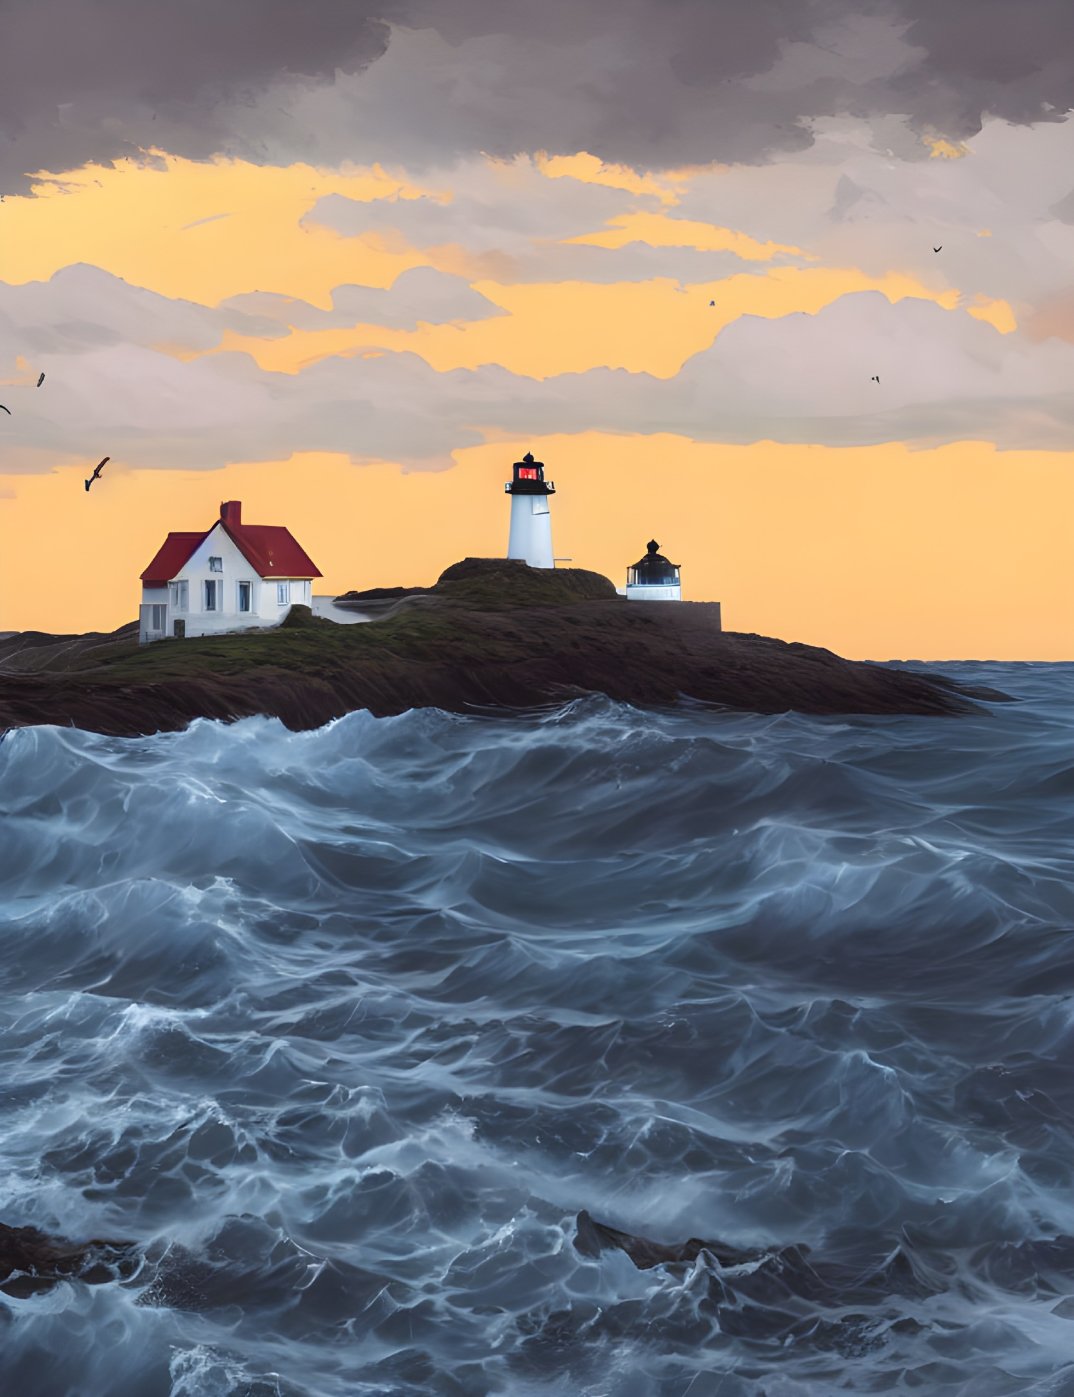 Rocky shore lighthouse with house under sunset sky, dark clouds, and rough sea waves